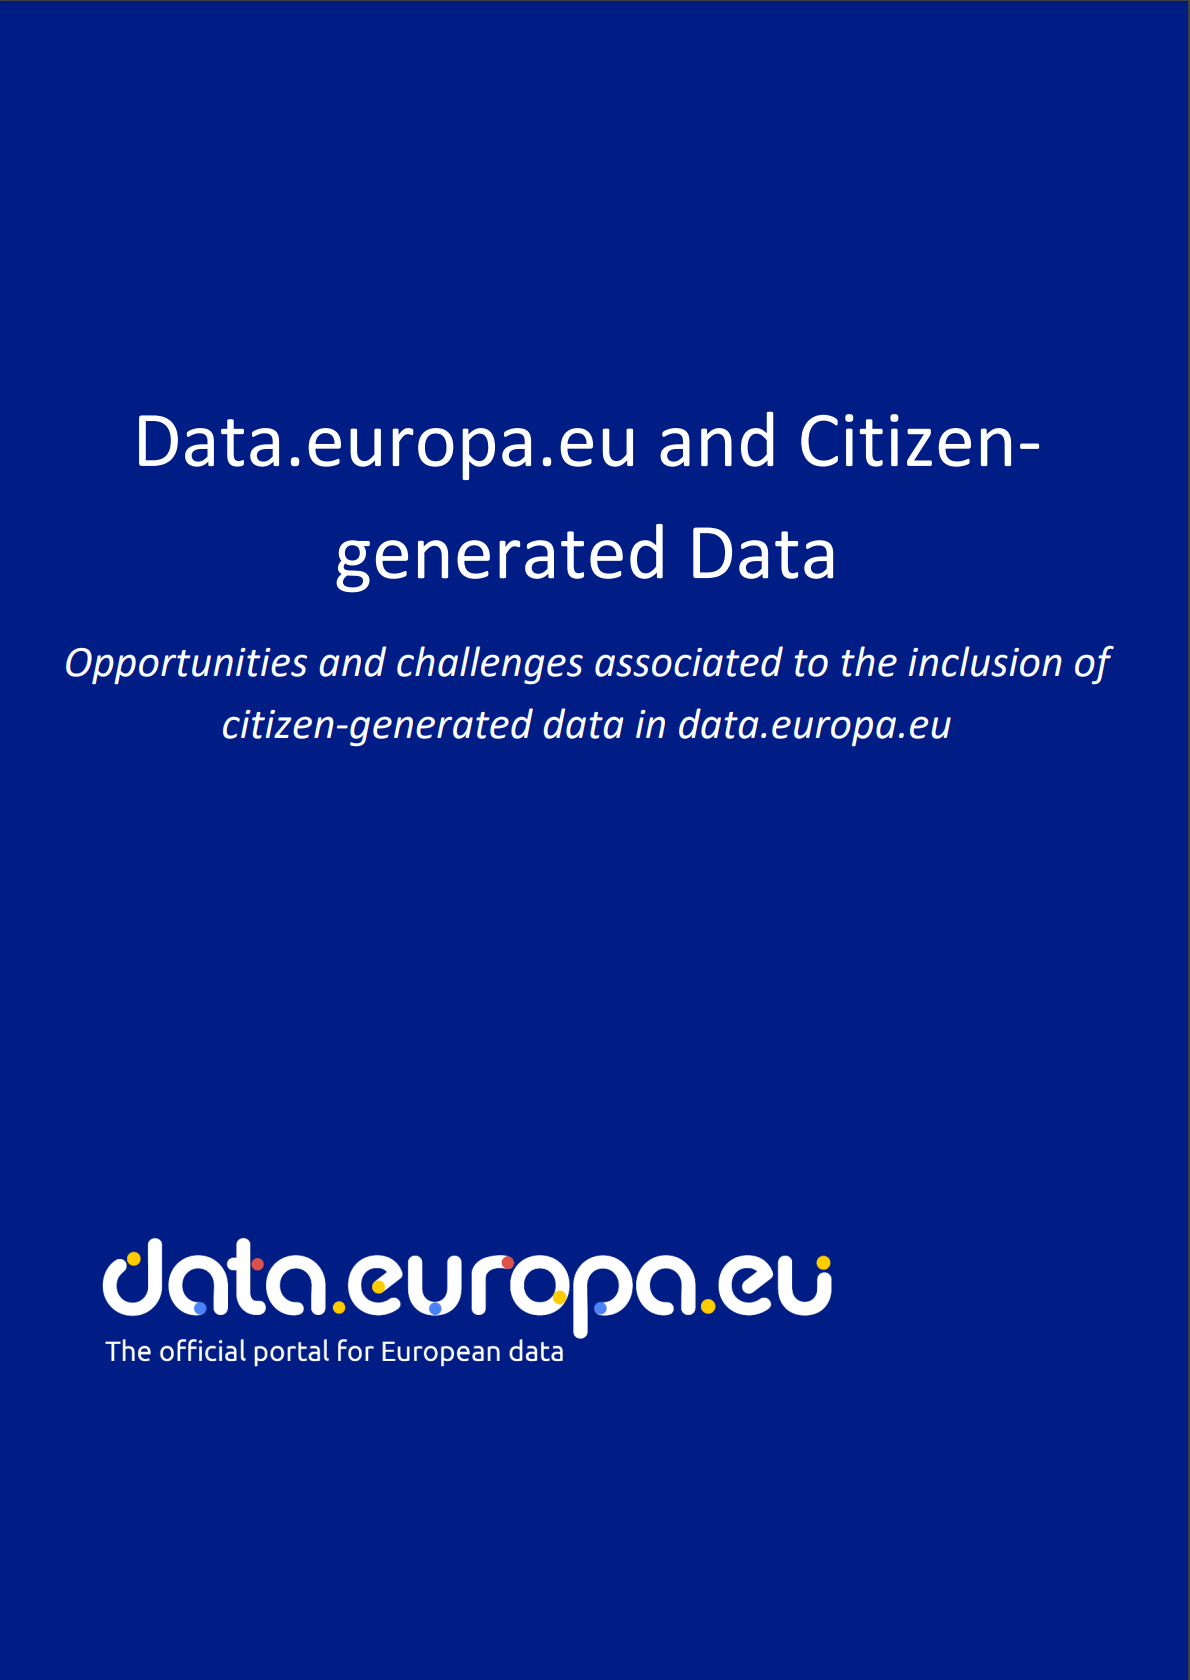 Data.europa.eu and citizen-generated data: Opportunities and challenges associated to the inclusion of citizen-generated data in data.europa.eu